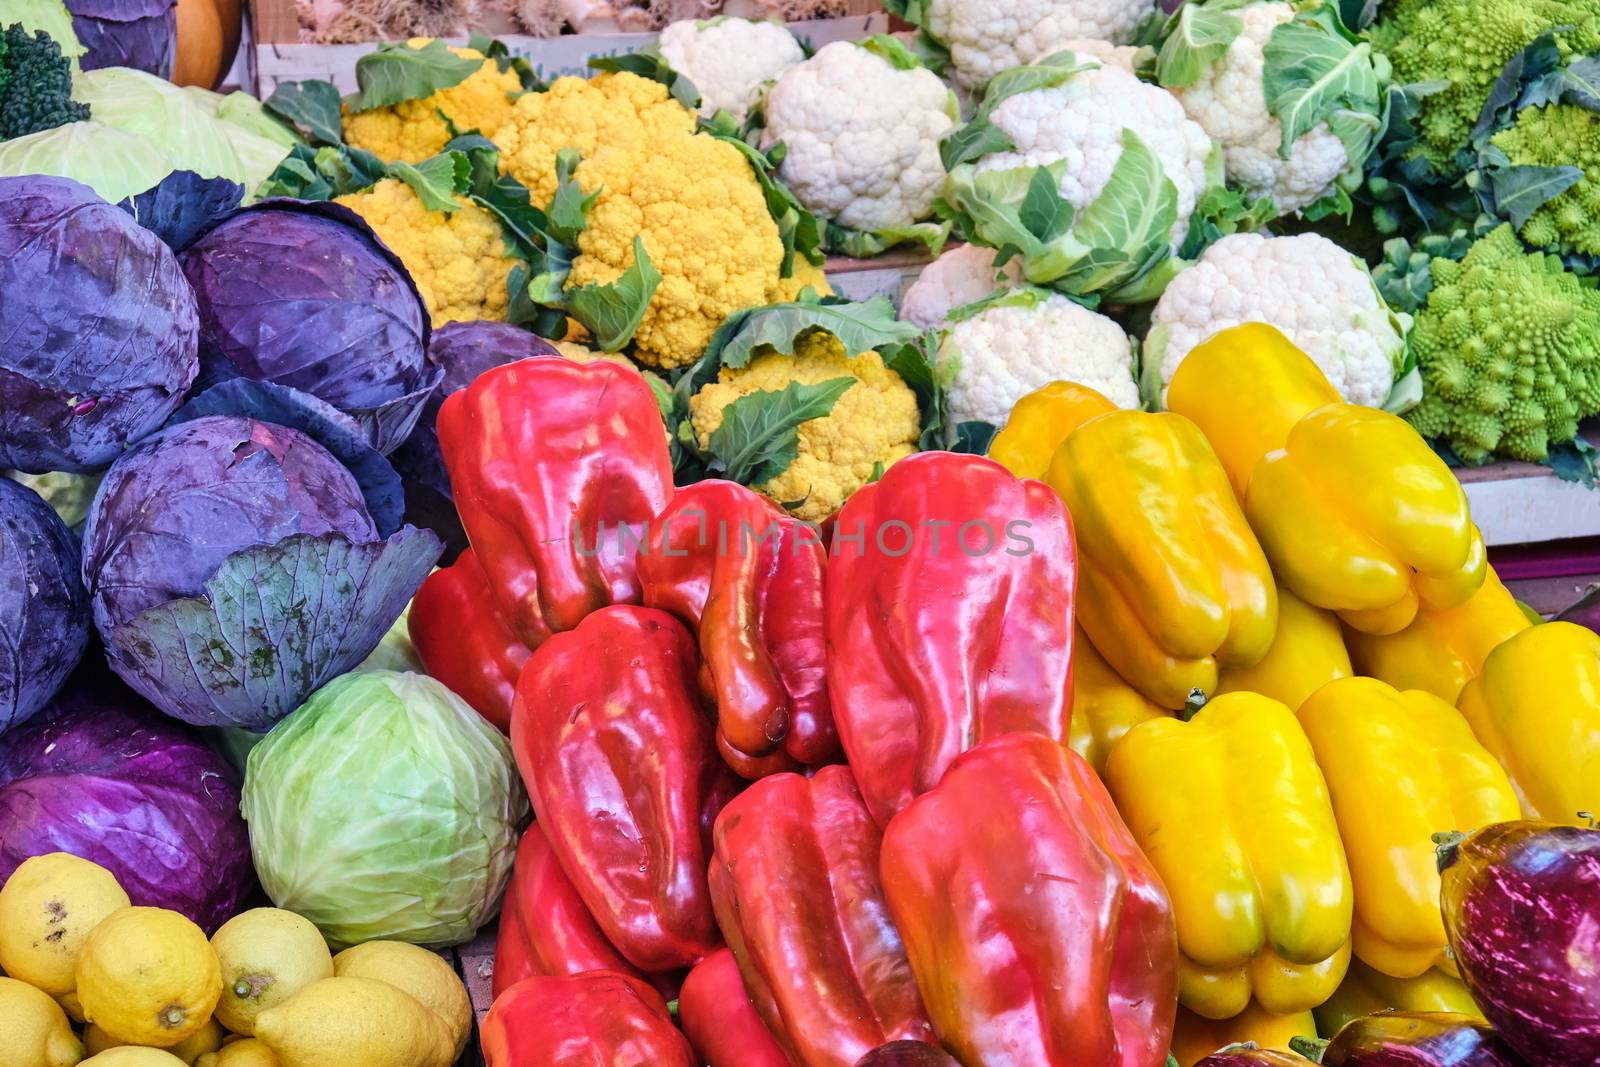 Bell pepper, cabbage and different kinds of broccoli for sale at a market in Rome